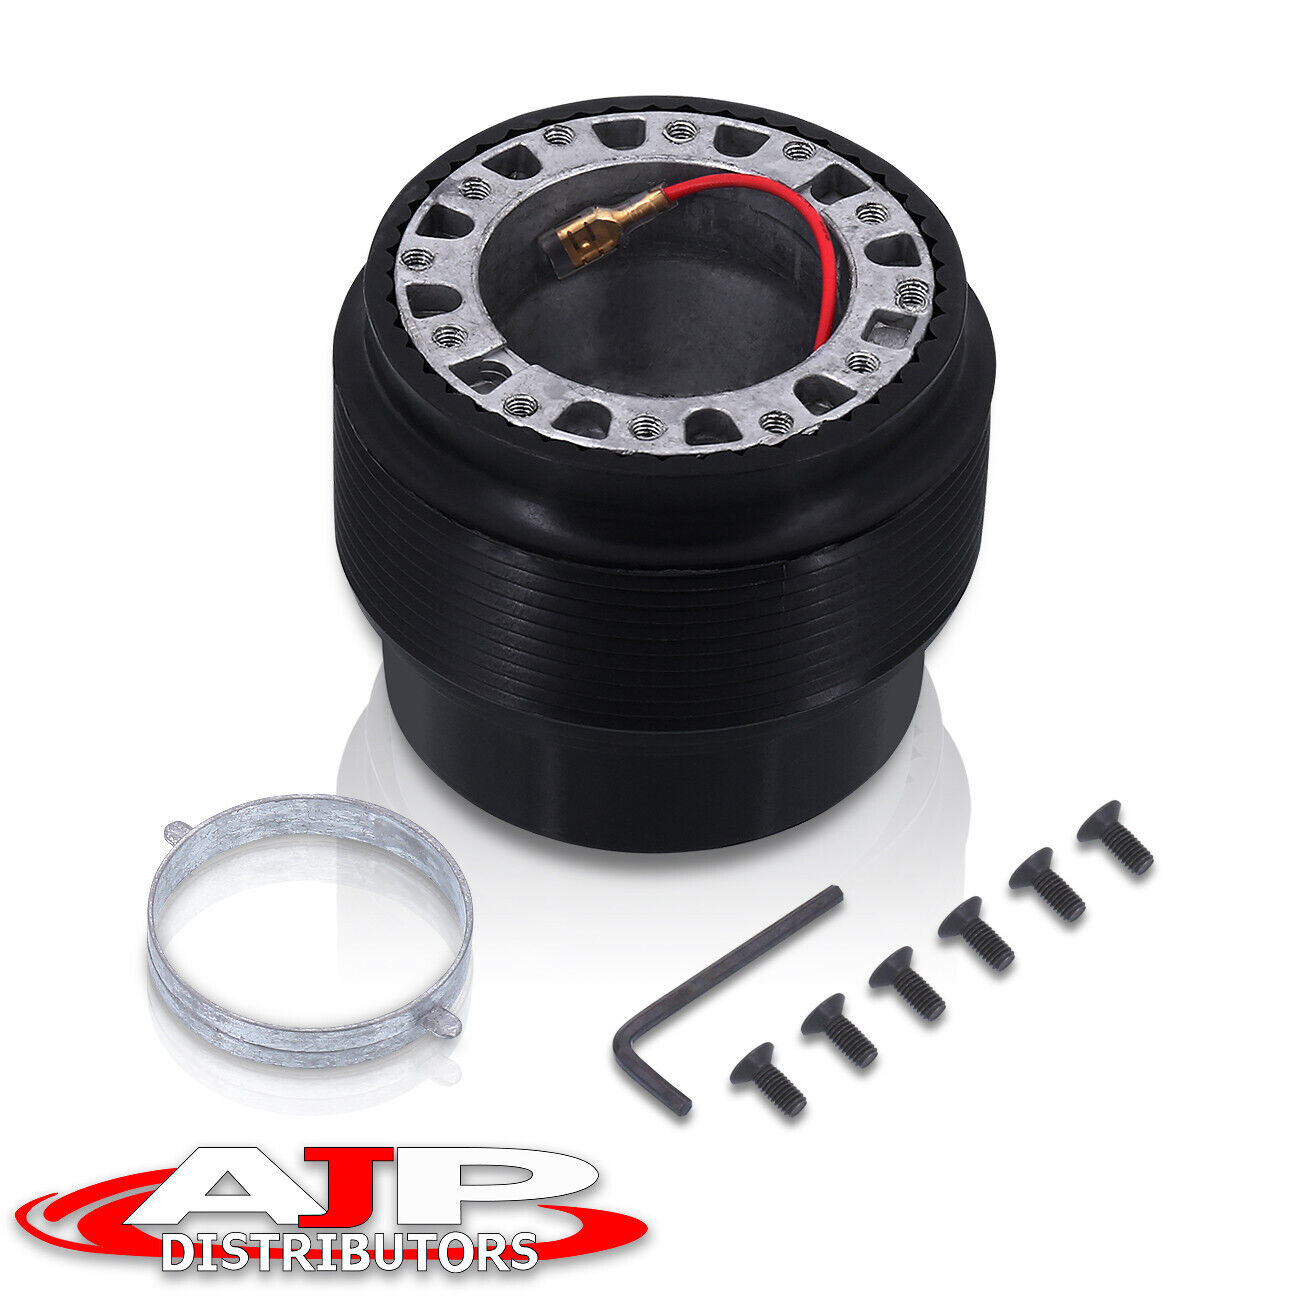 6-Bolt Steering Wheel Hub Adapter Kit For Civic Accord Prelude S2000 S2K CRZ RSX